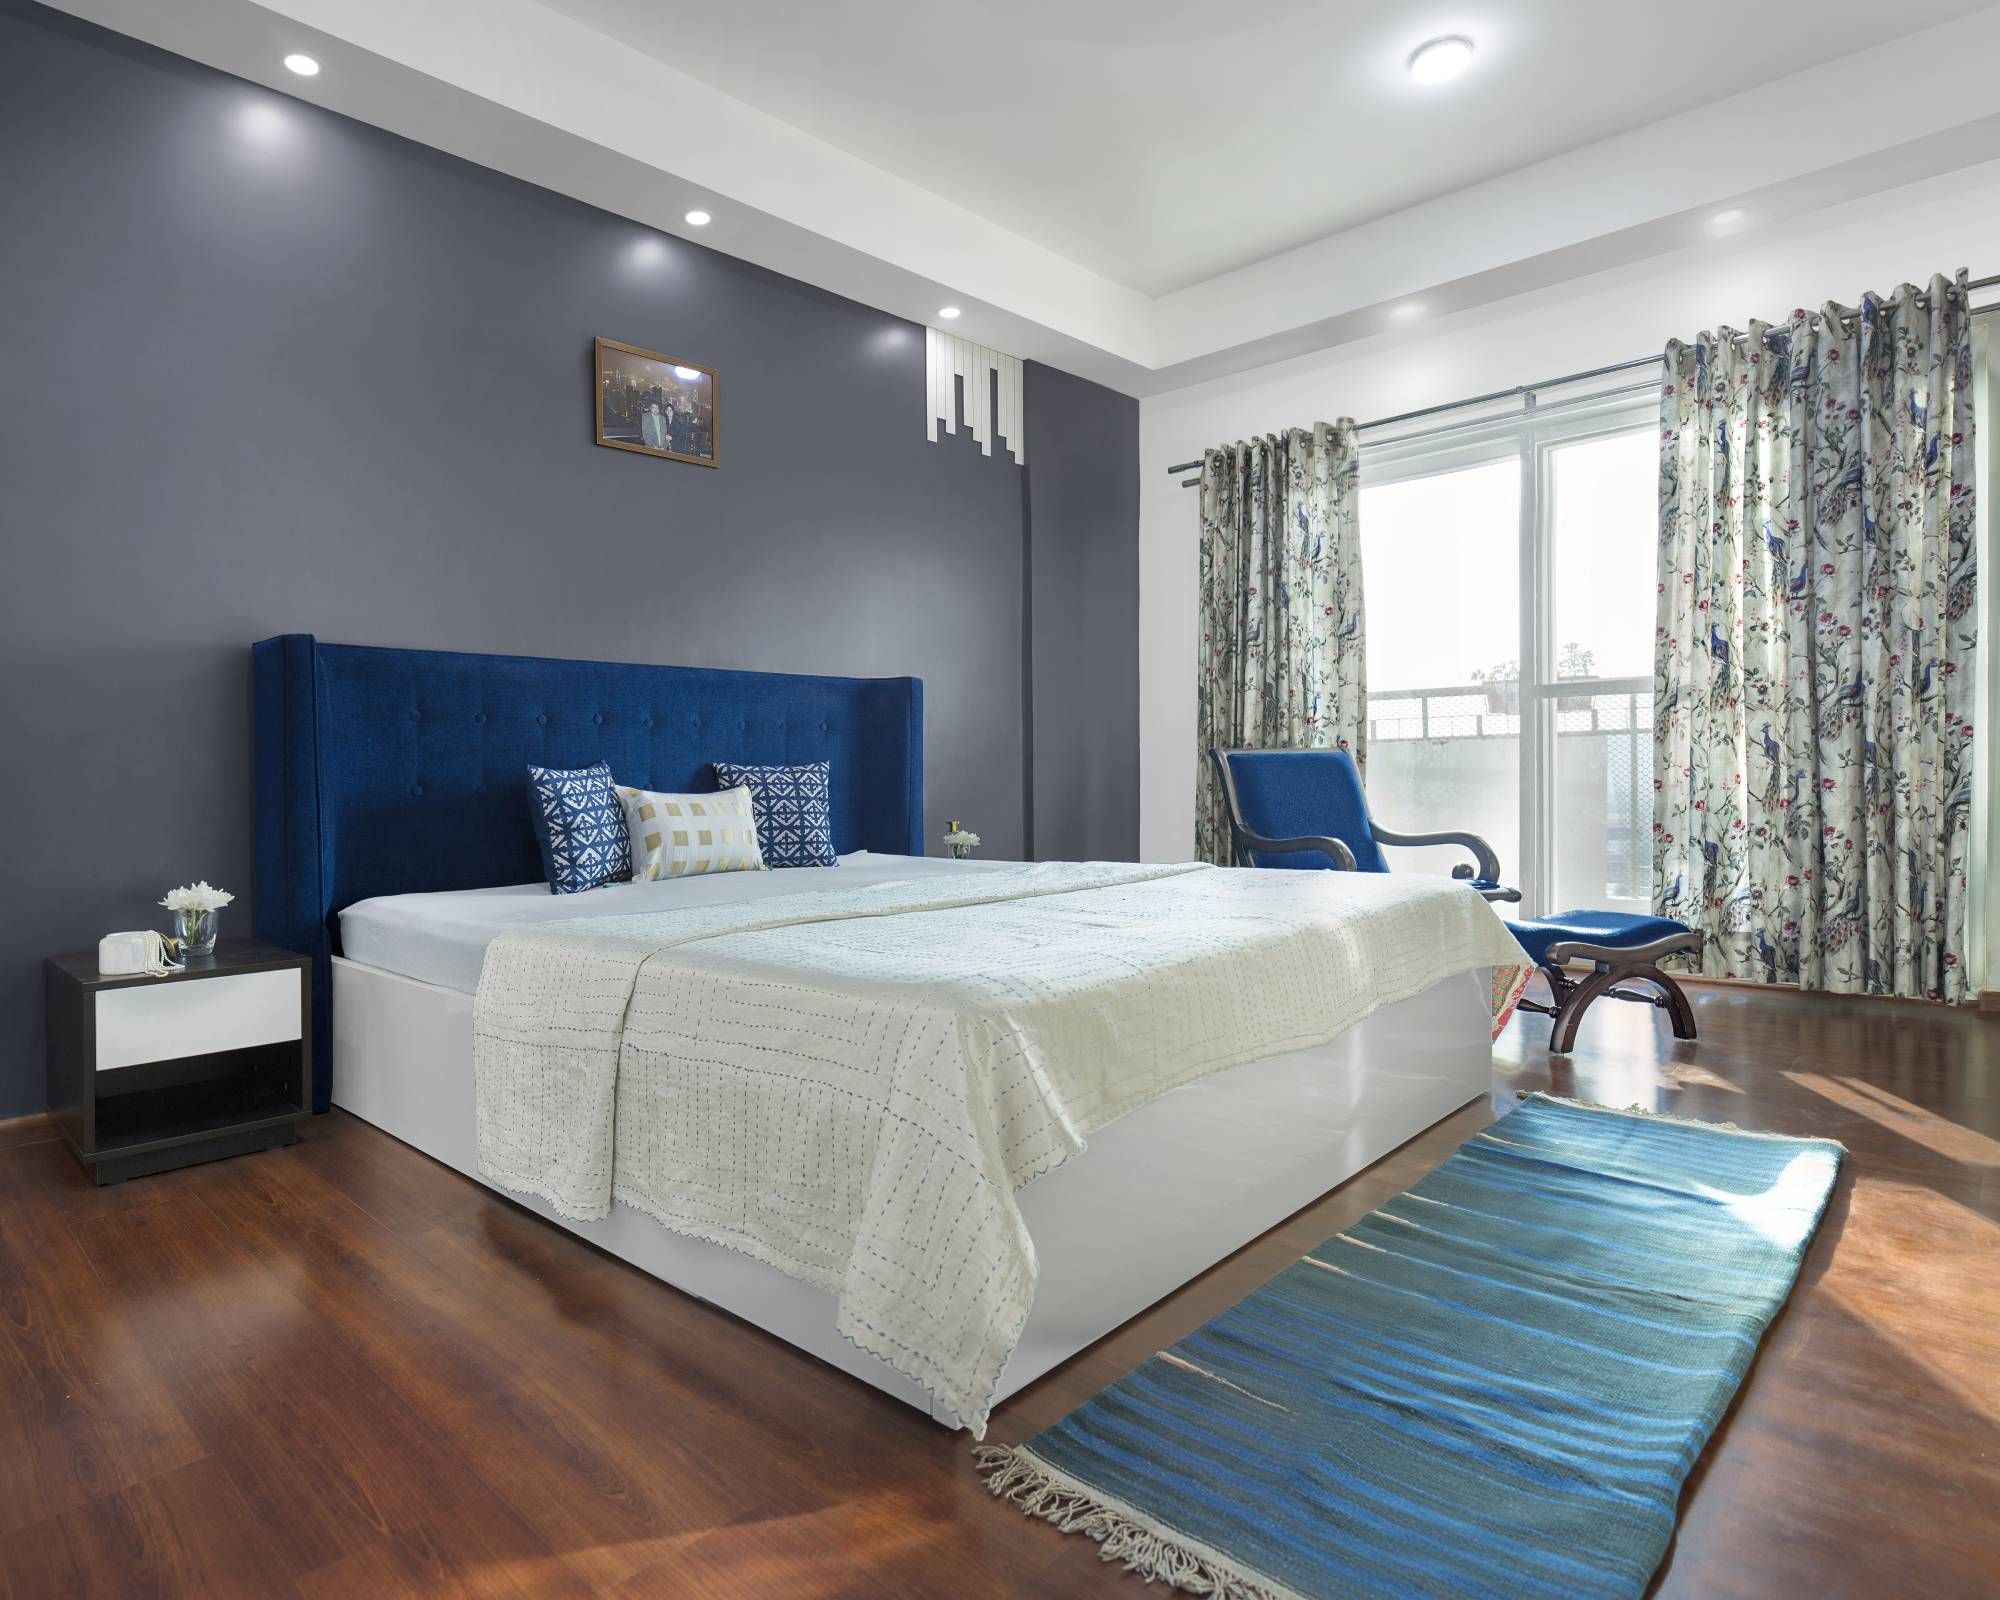 Modern Guest Room Design With Blue Accent Chair And Pouffe